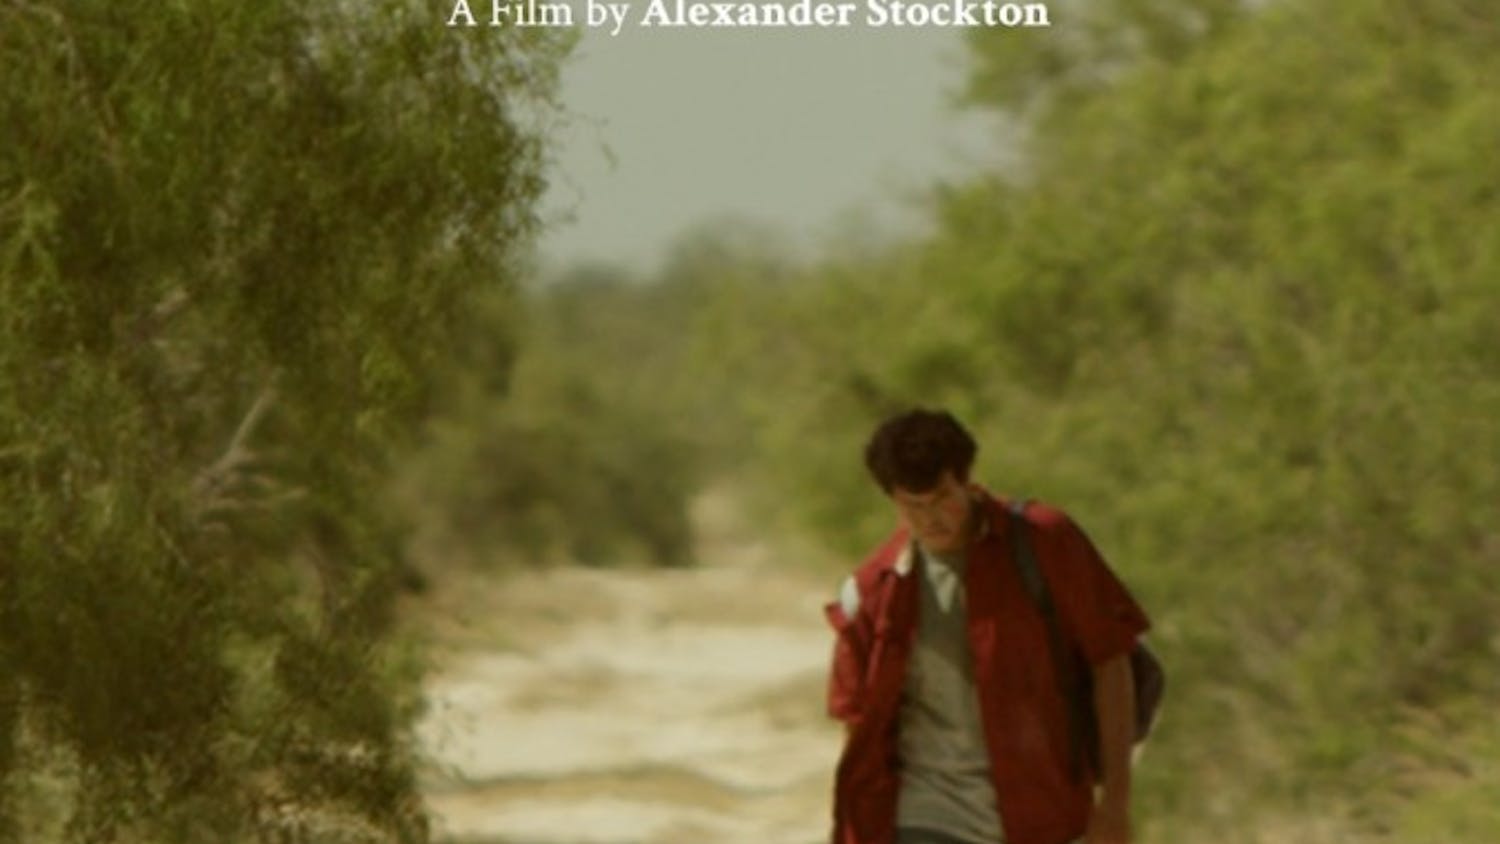 "Transient" is Alexander Stockton '15's first feature-length fiction film.